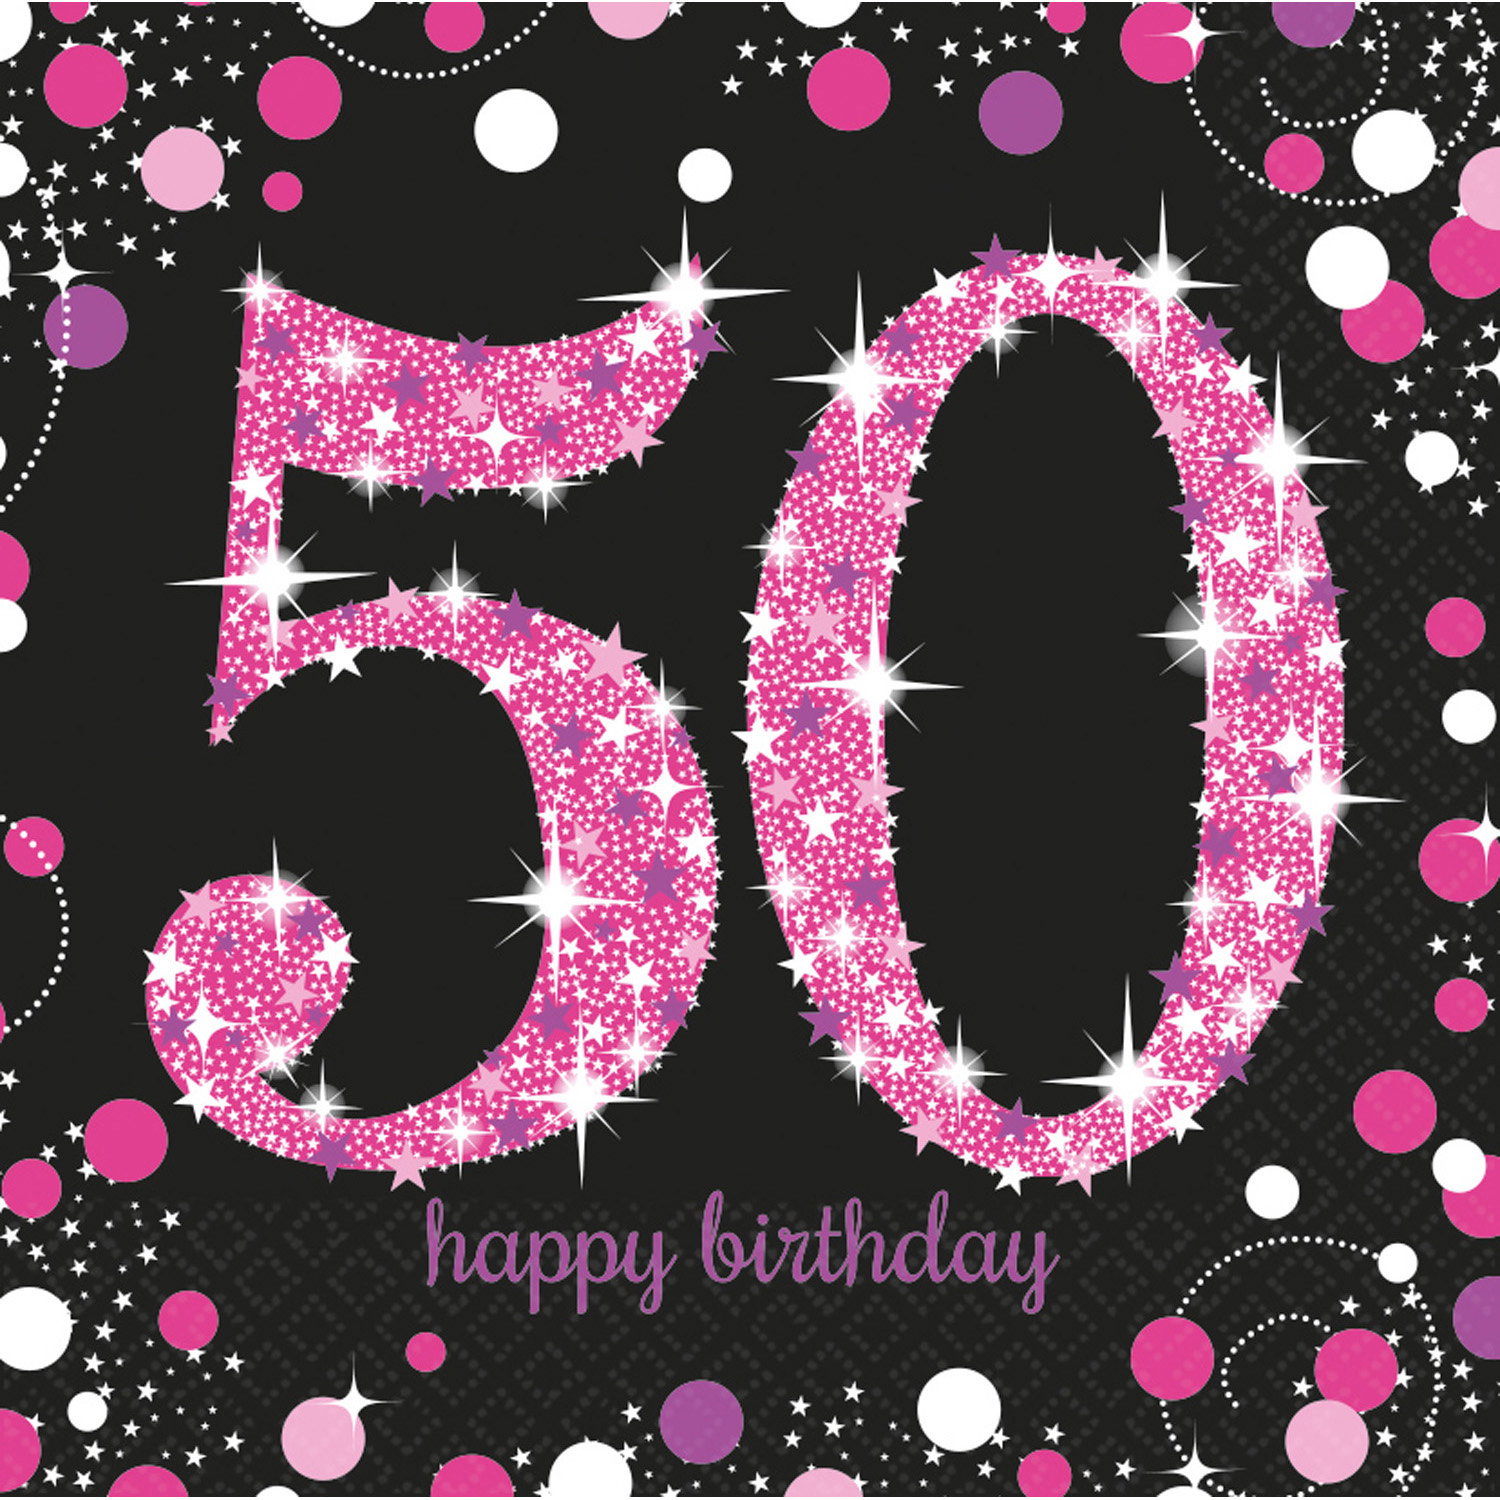 Tissues for 50th Birthday in Pink Sparkly